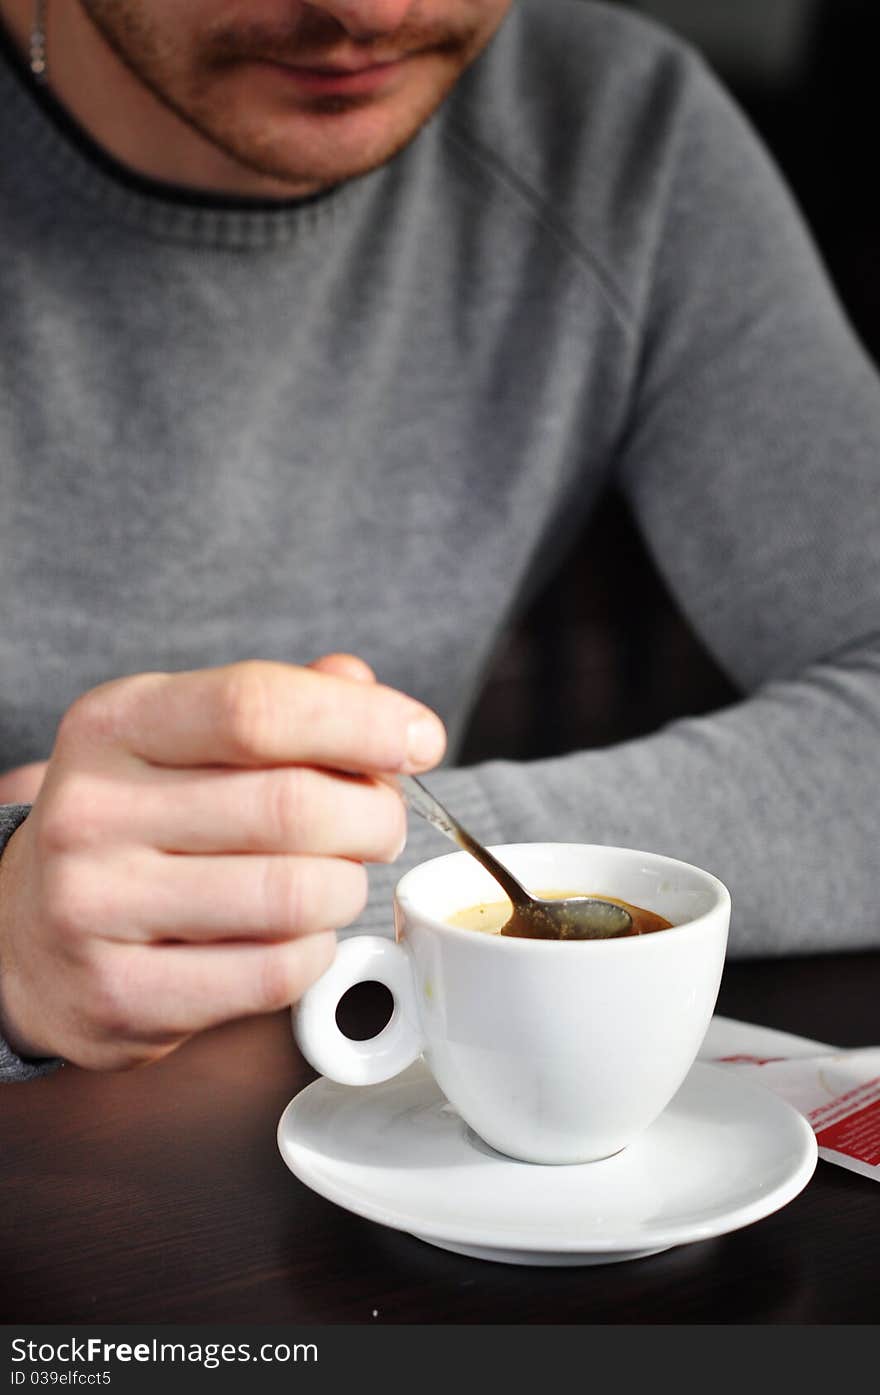 Man having morning coffee mixing it with spoon. Man having morning coffee mixing it with spoon